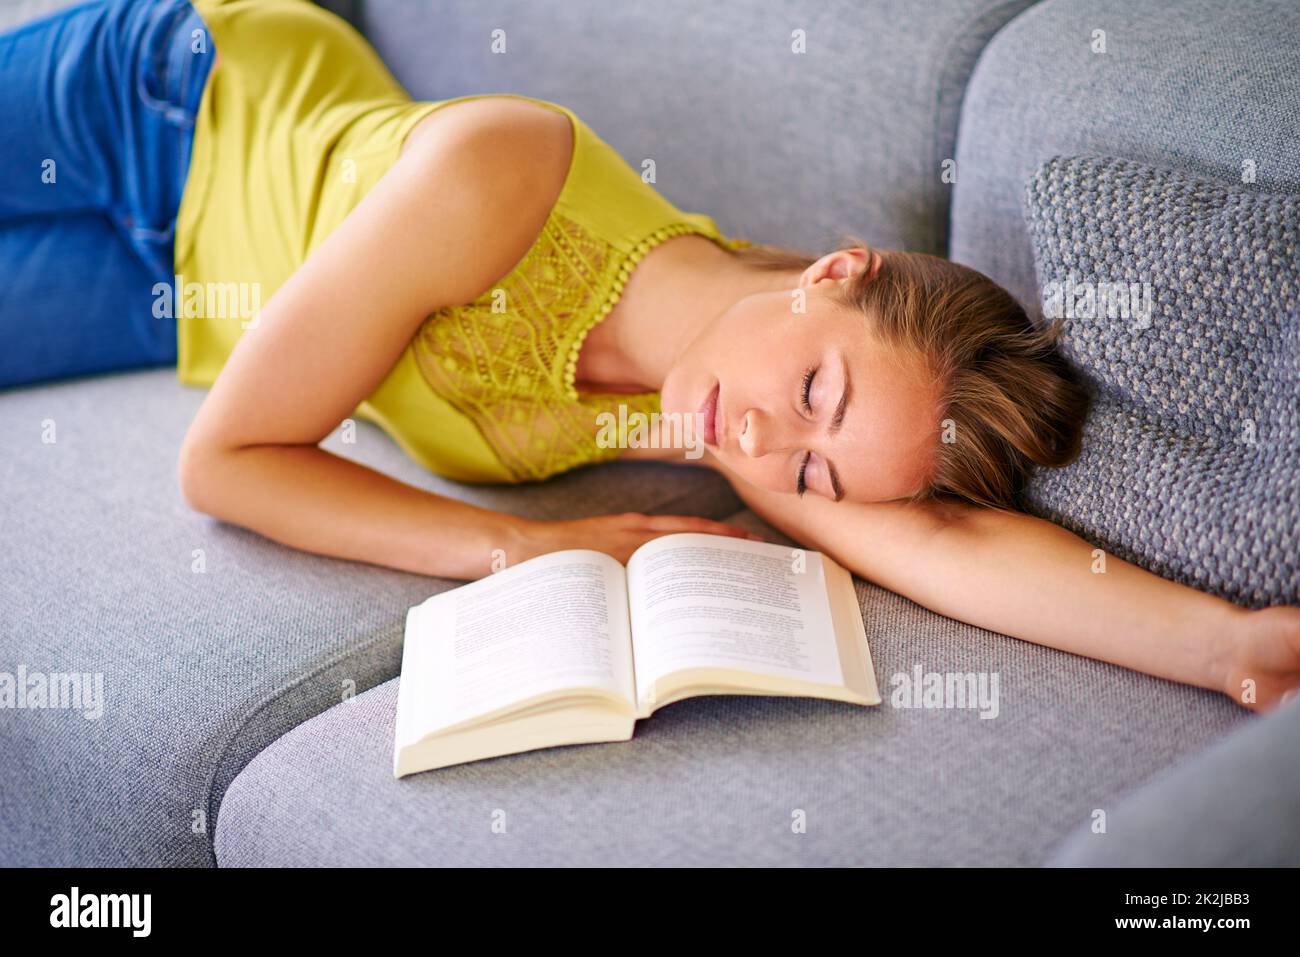 Nowhere more relaxing than home.... Shot of a young woman sleeping beside a book on her sofa at home. Stock Photo